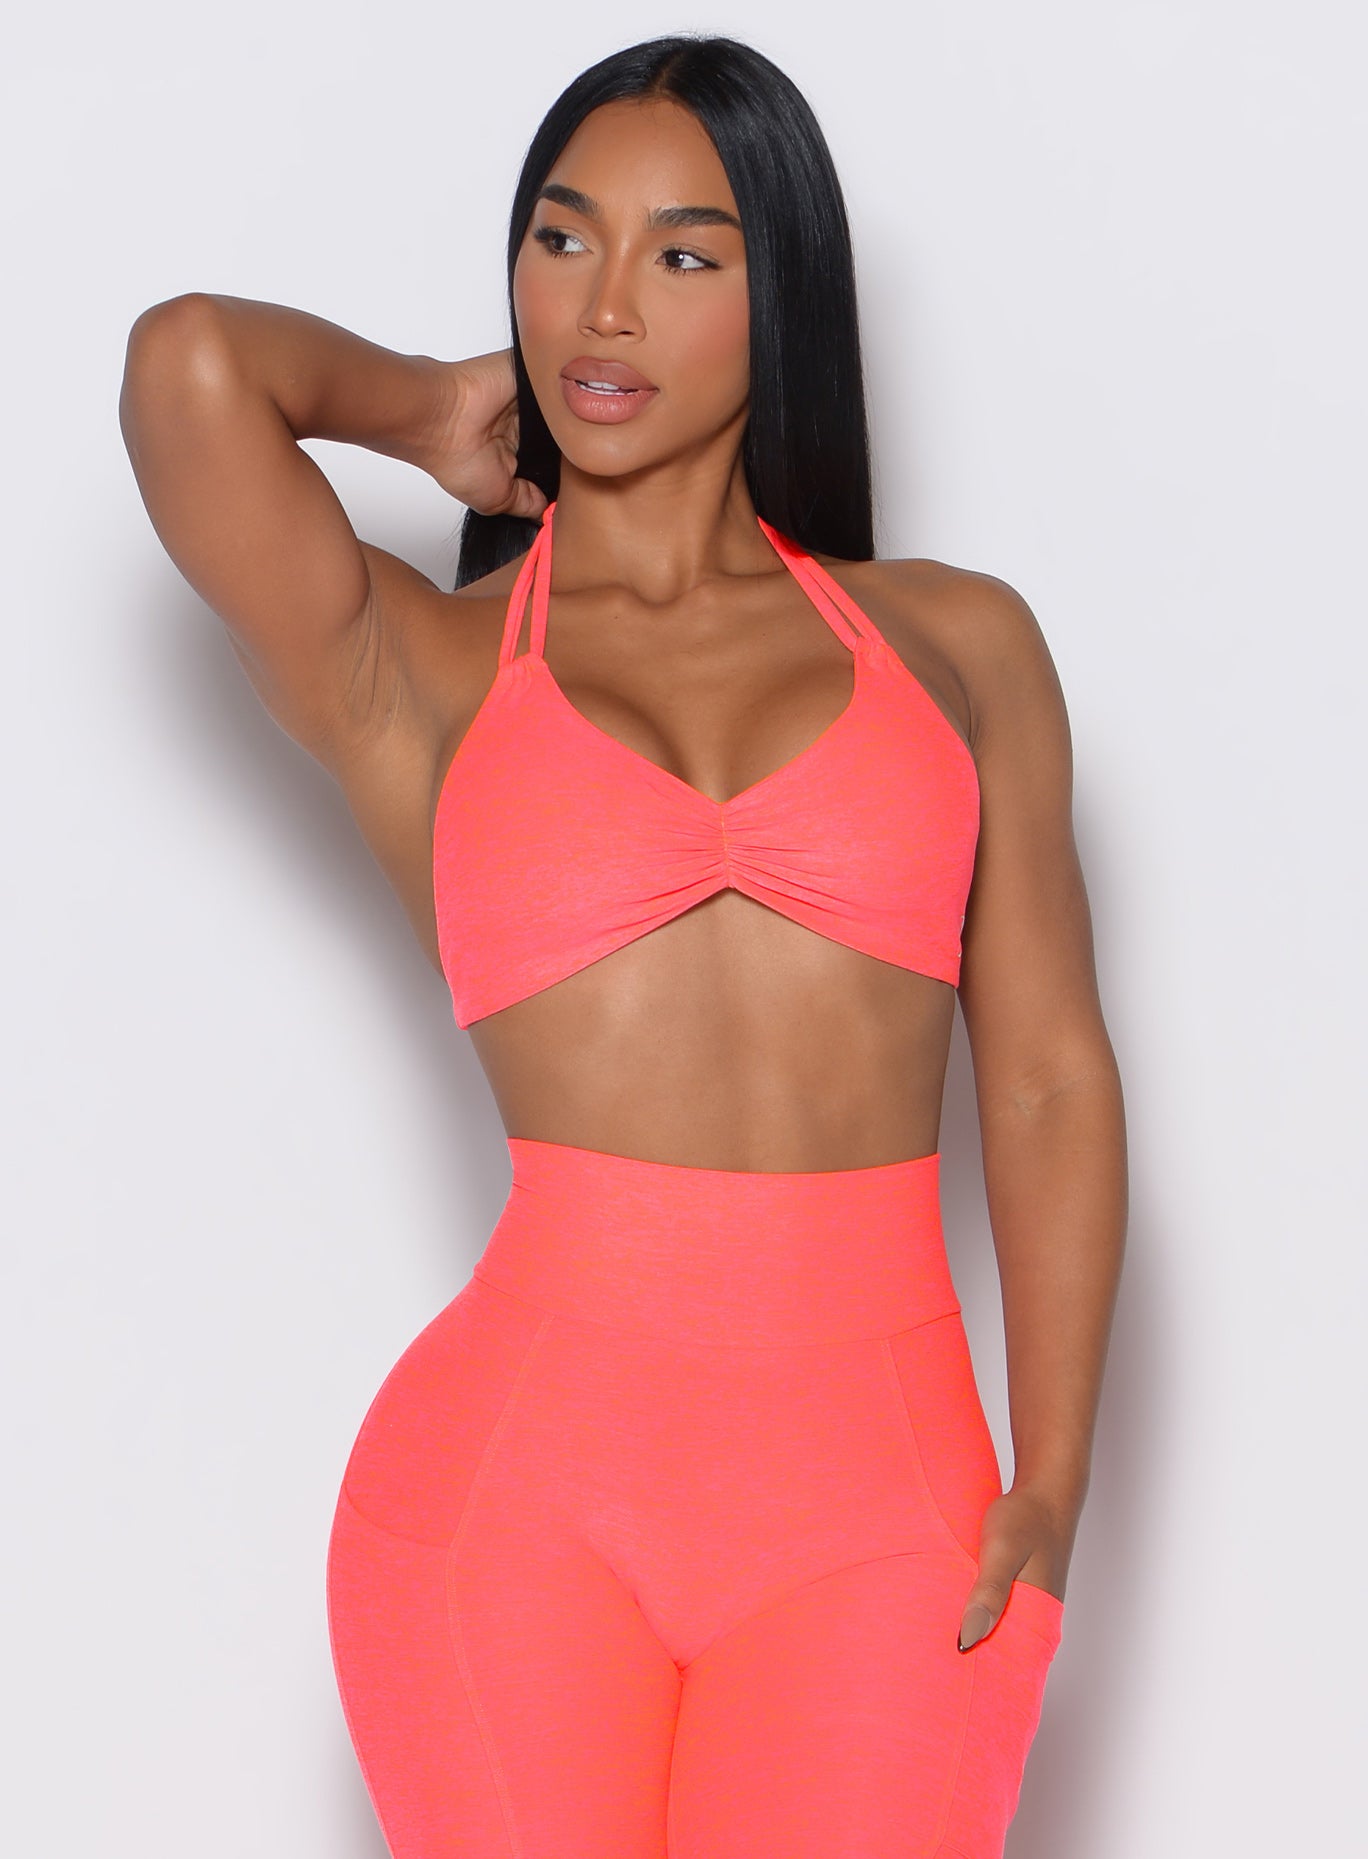 front profile view of a model wearing our butterfly sports bra in Neon Apricot Pink color along with the matching leggings